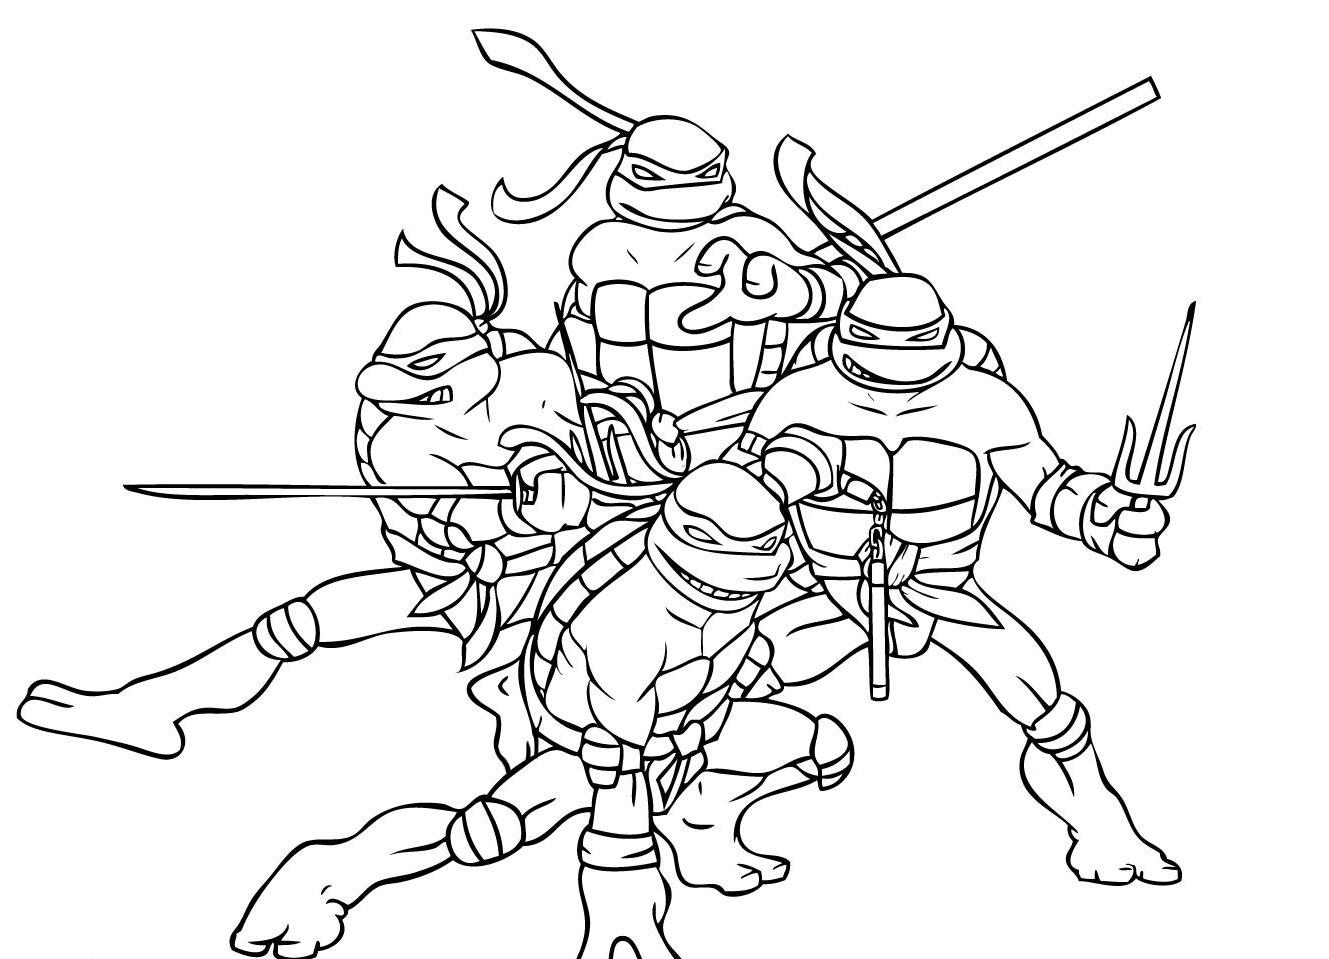 Donatello The Turtles Ninja Coloring Pages 